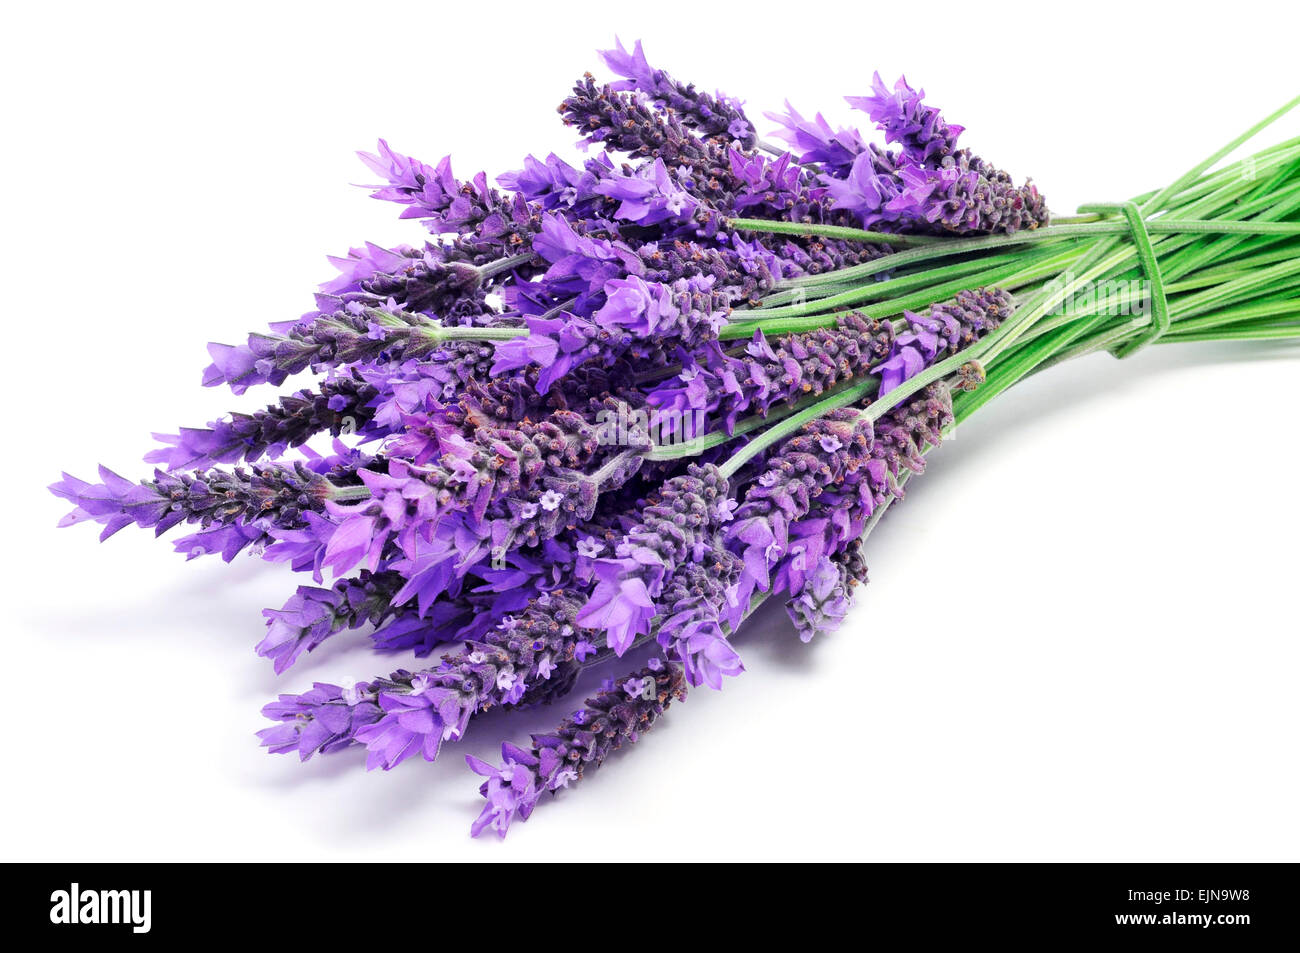 a pile of lavender flowers on a white background Stock Photo